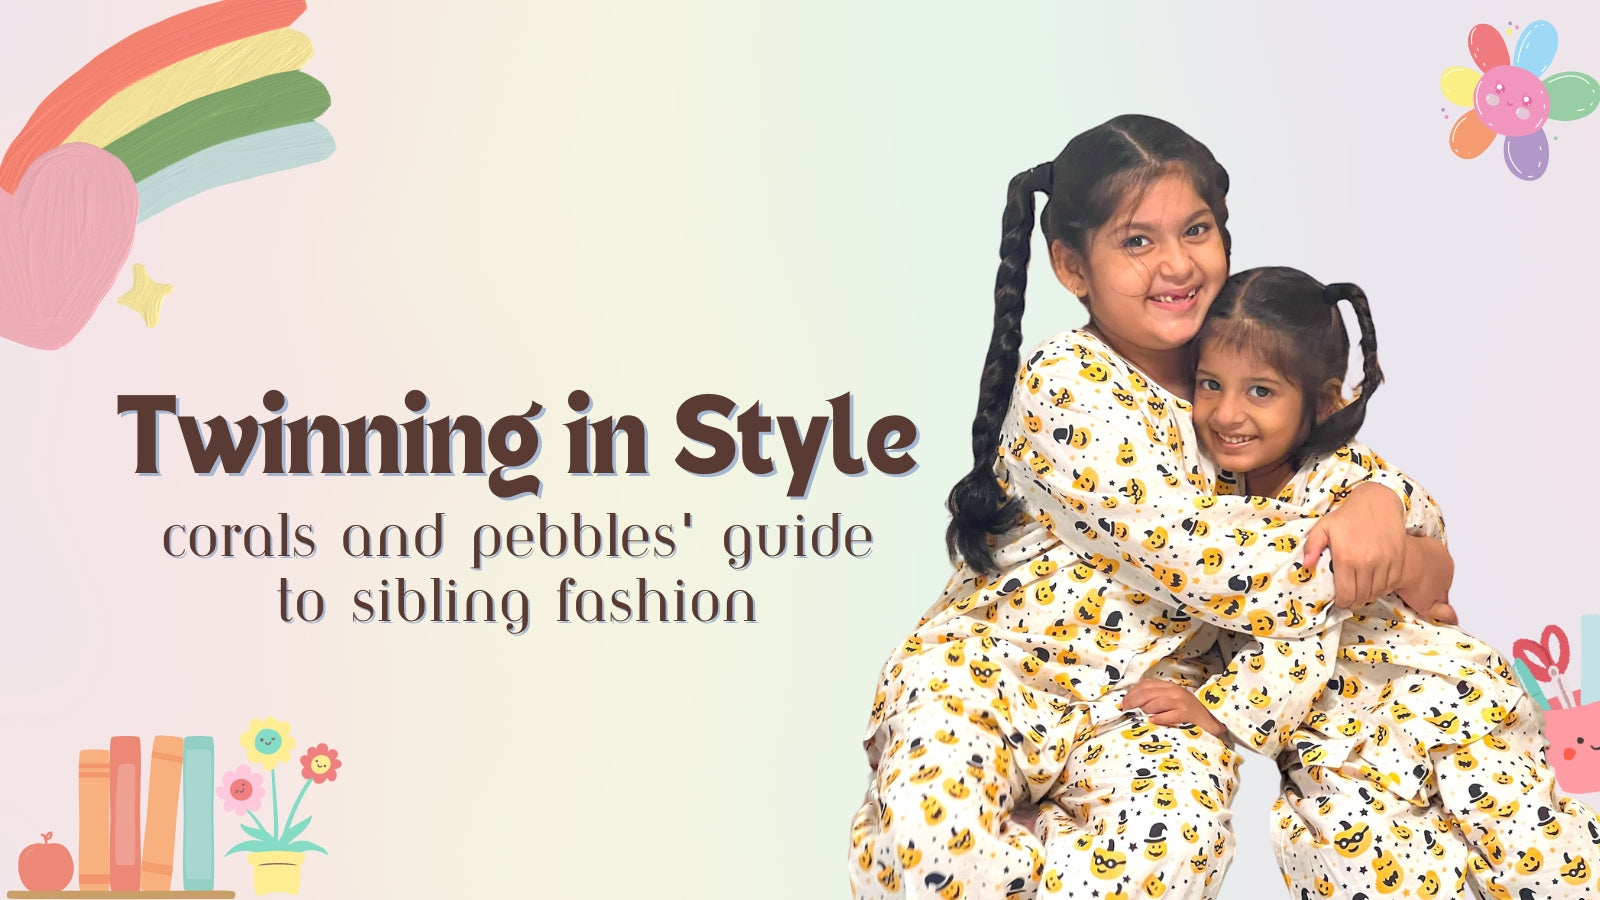 Double the Fashion Fun: Coordinating Twinning Outfits for Siblings